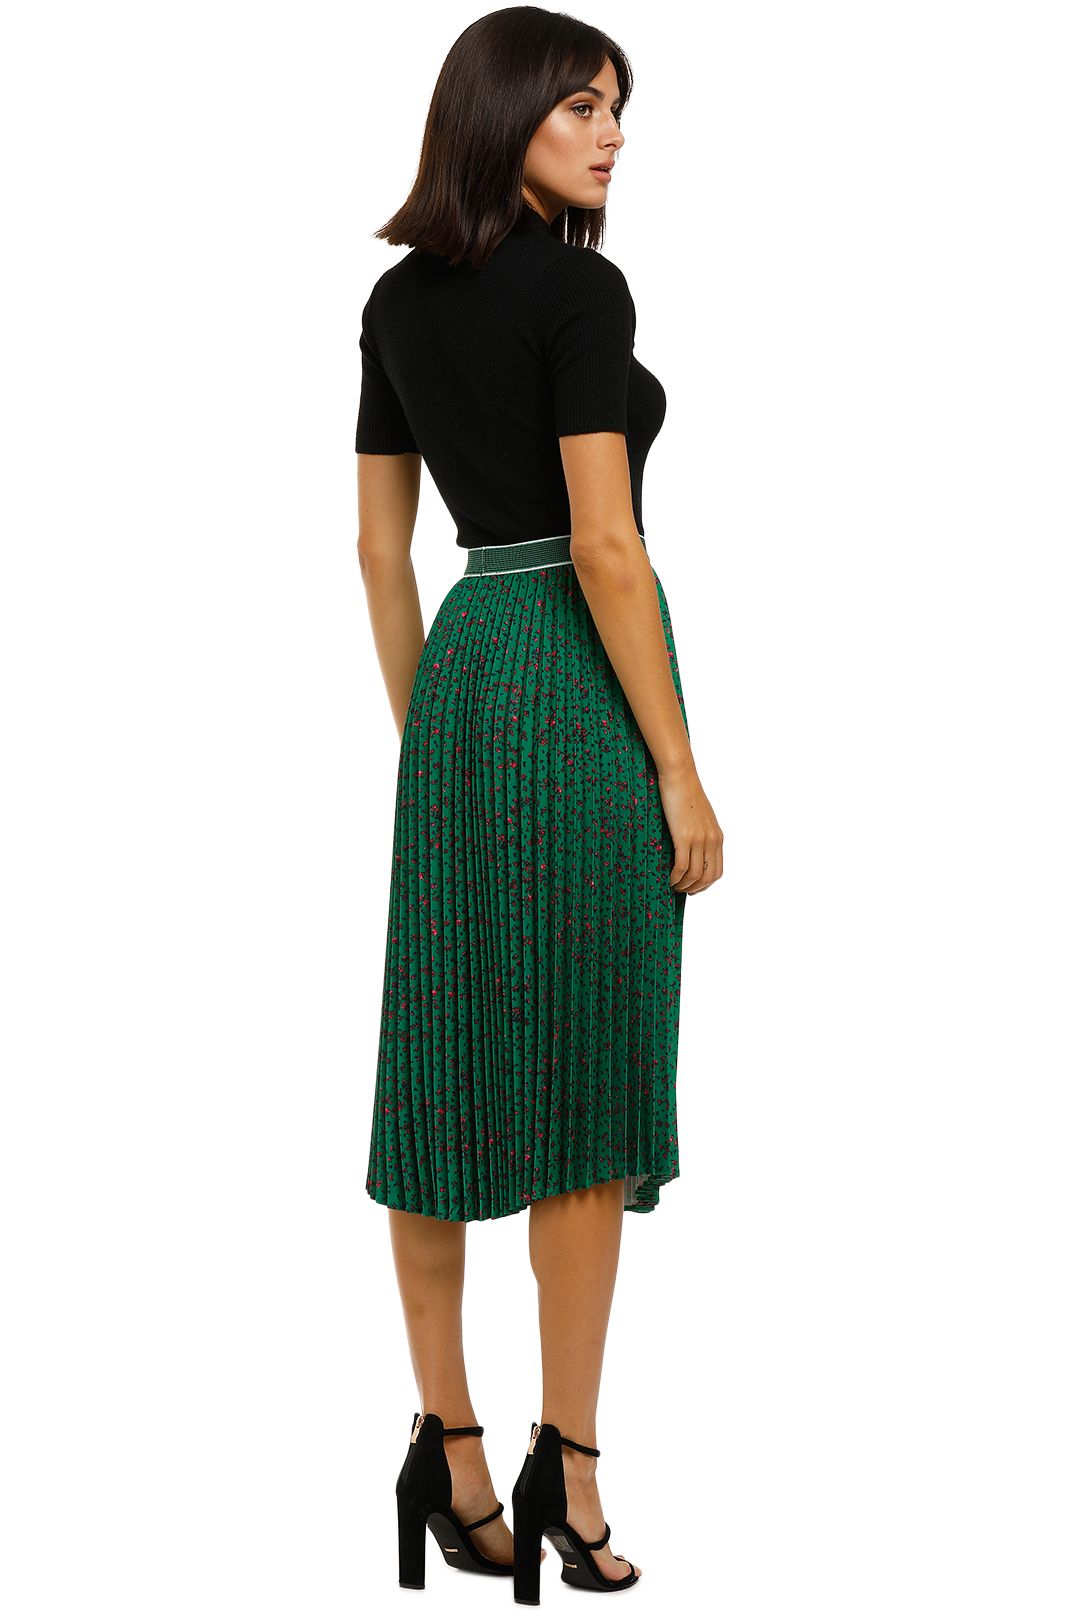 Curate-by-Trelise-Cooper-Side-Pleat-Skirt-Green-Back